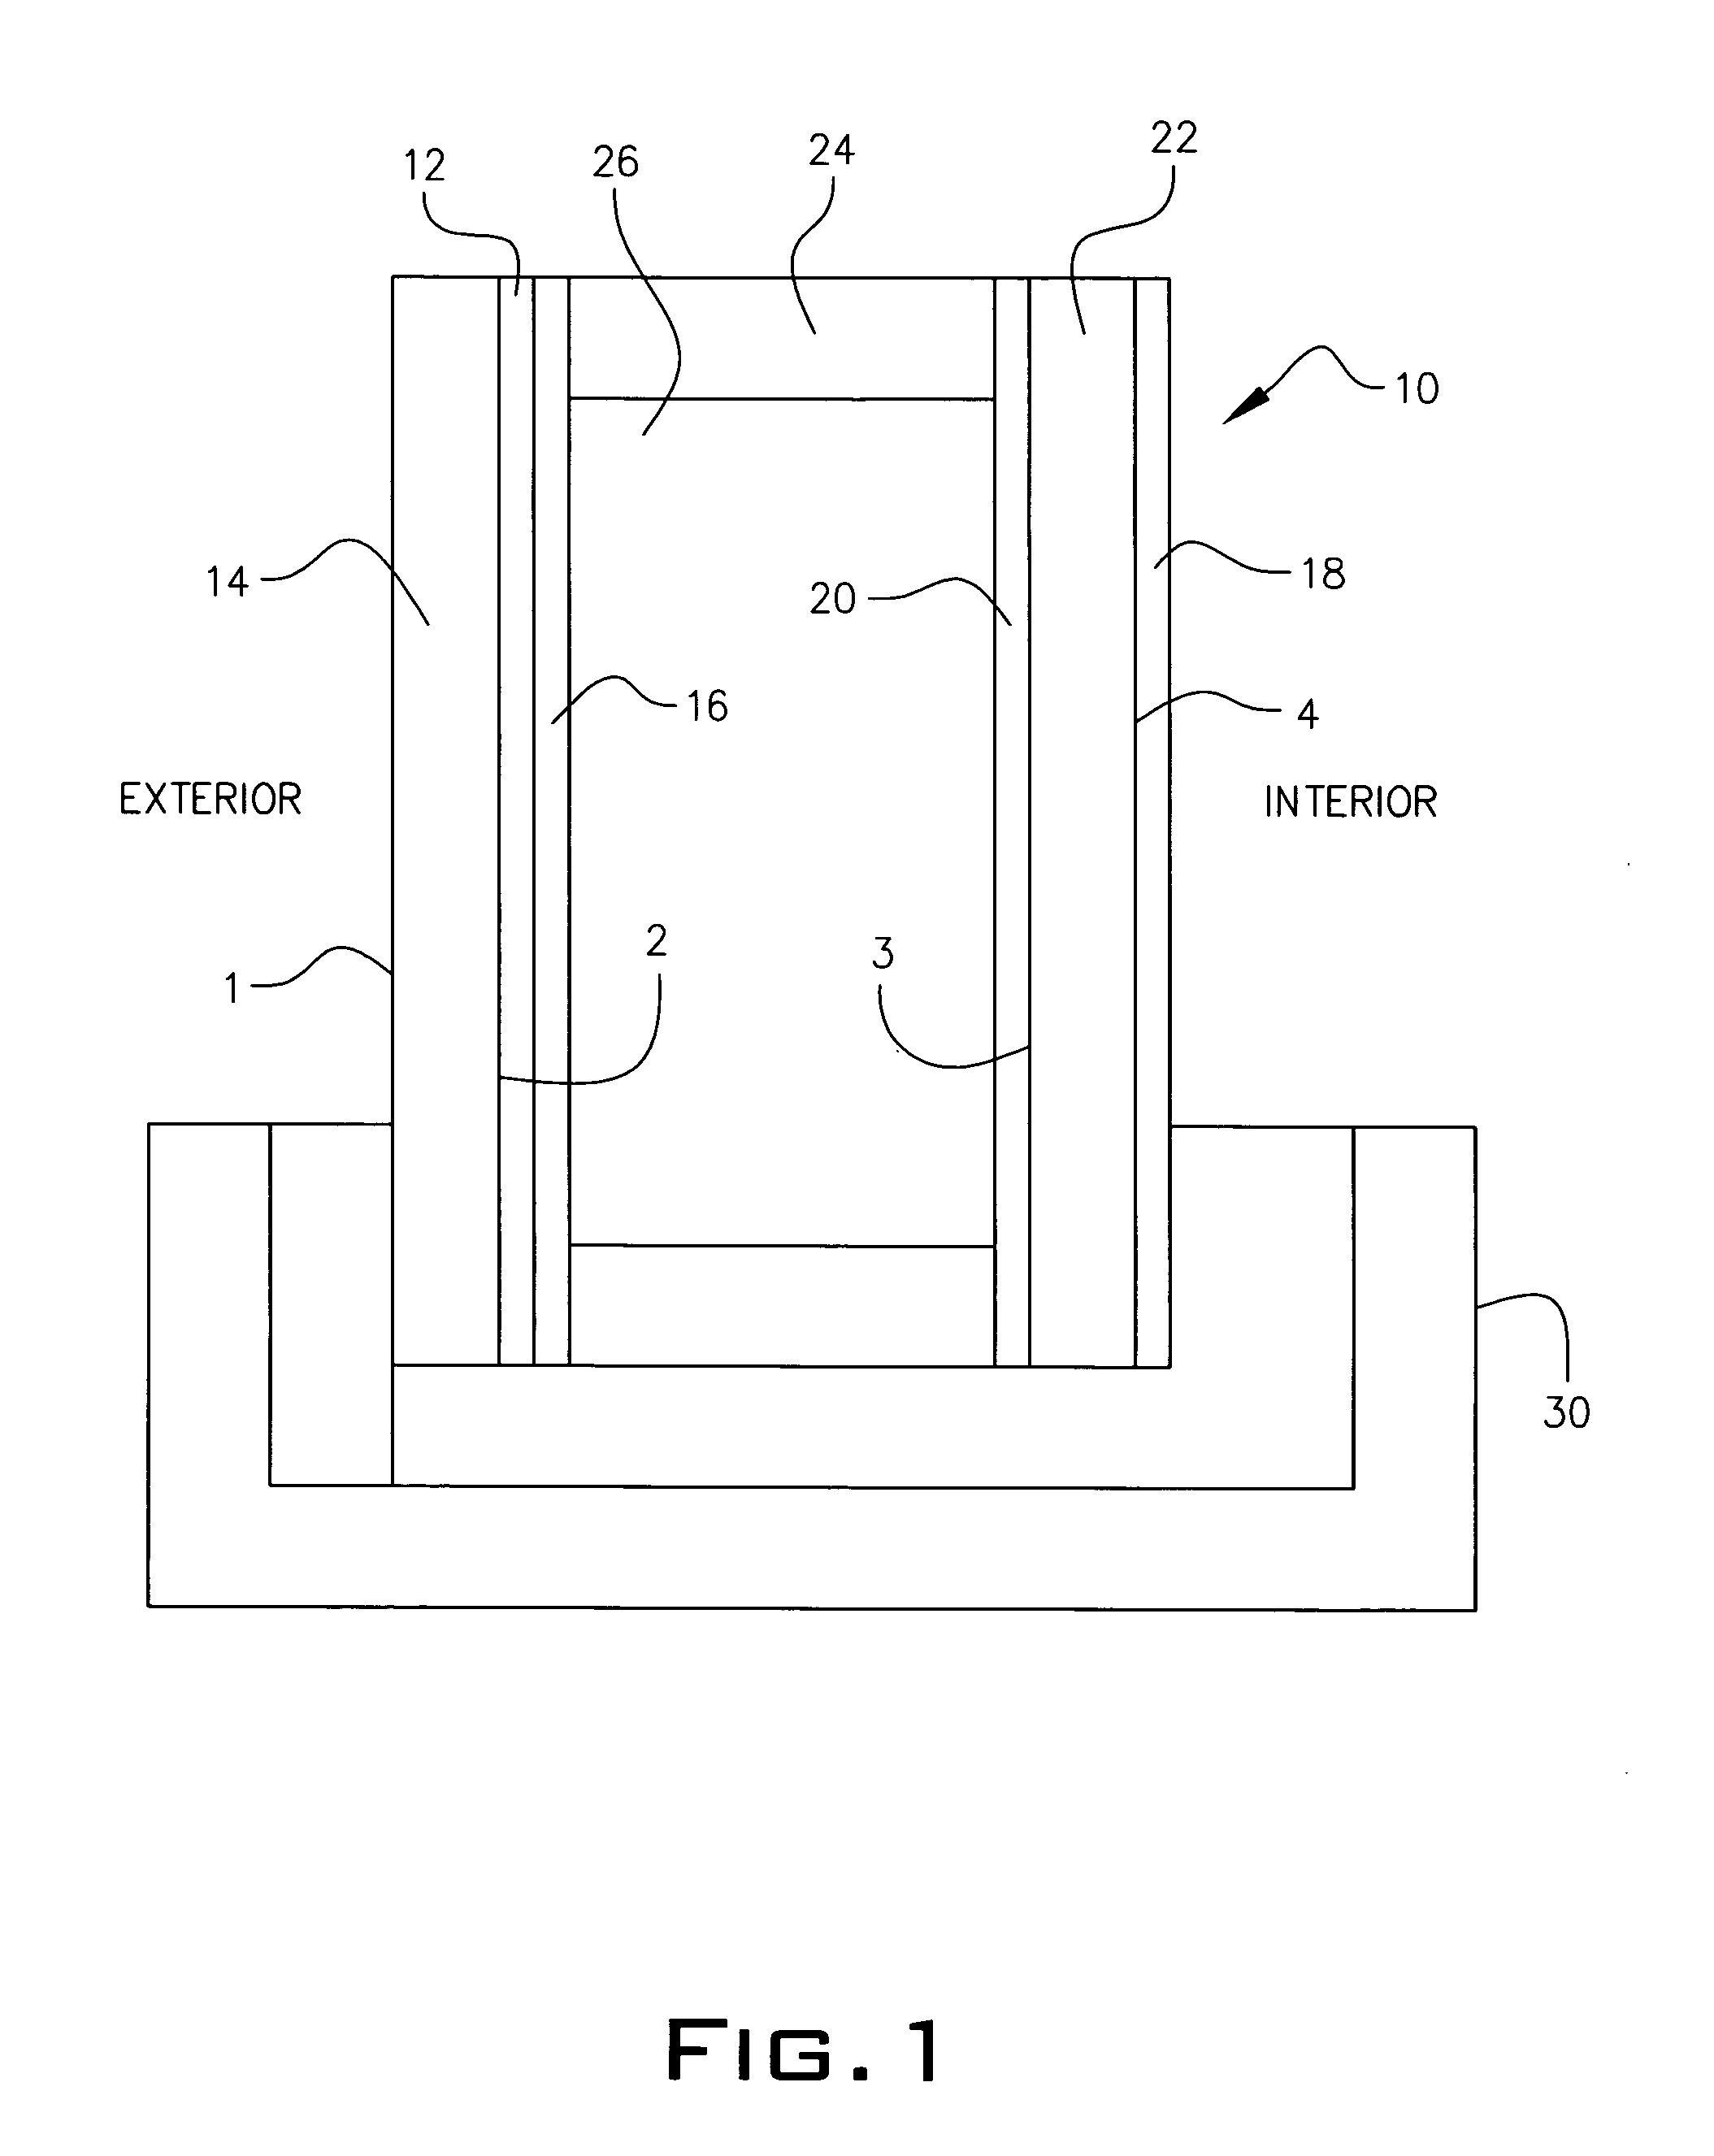 Method of manufacturing an impact resistant and insulated glass unit composite with solar control and low-E coatings